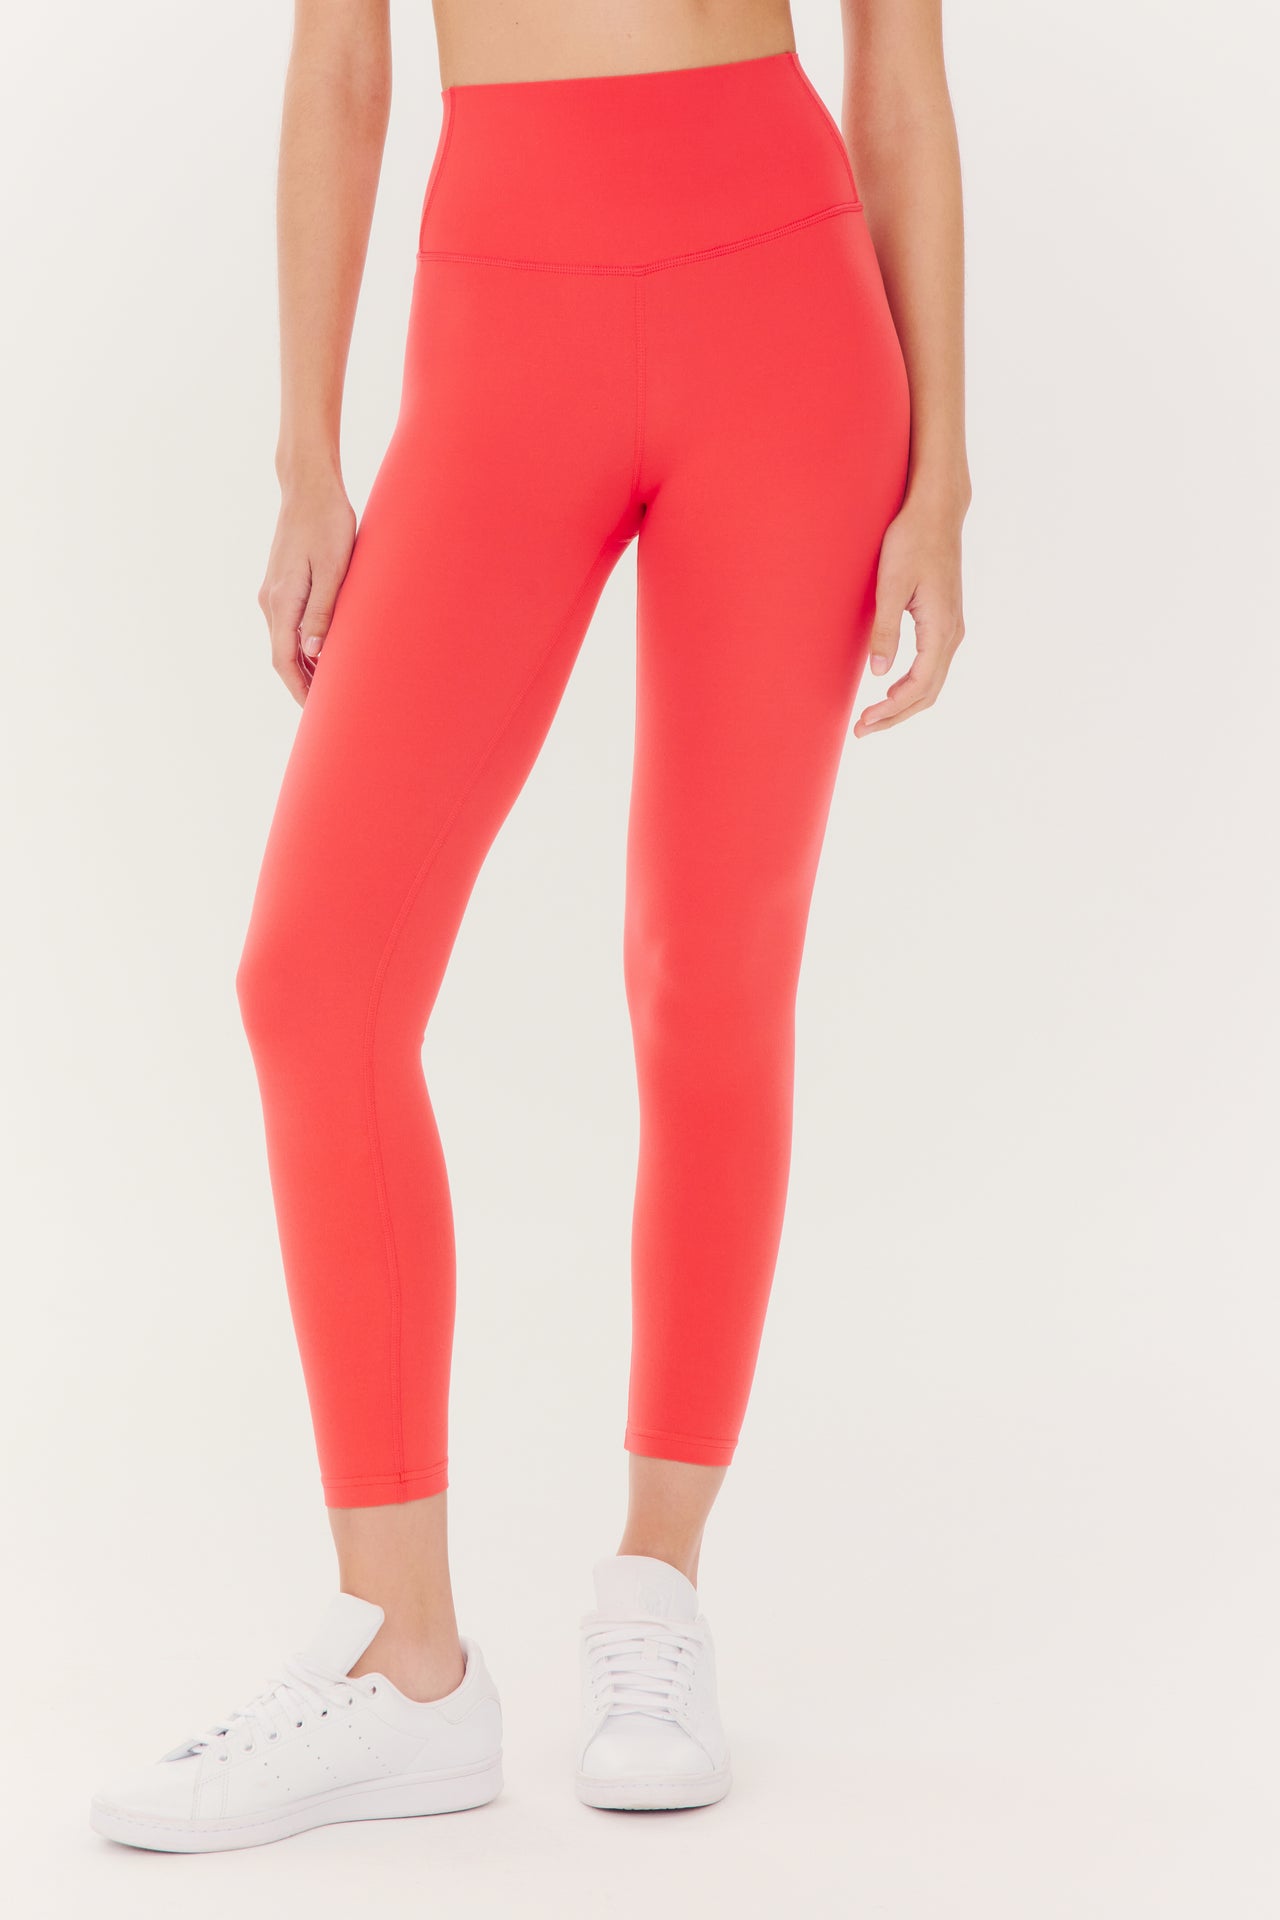 Woman wearing red Airweight High Waist Legging in Melon by SPLITS59 and white sneakers.